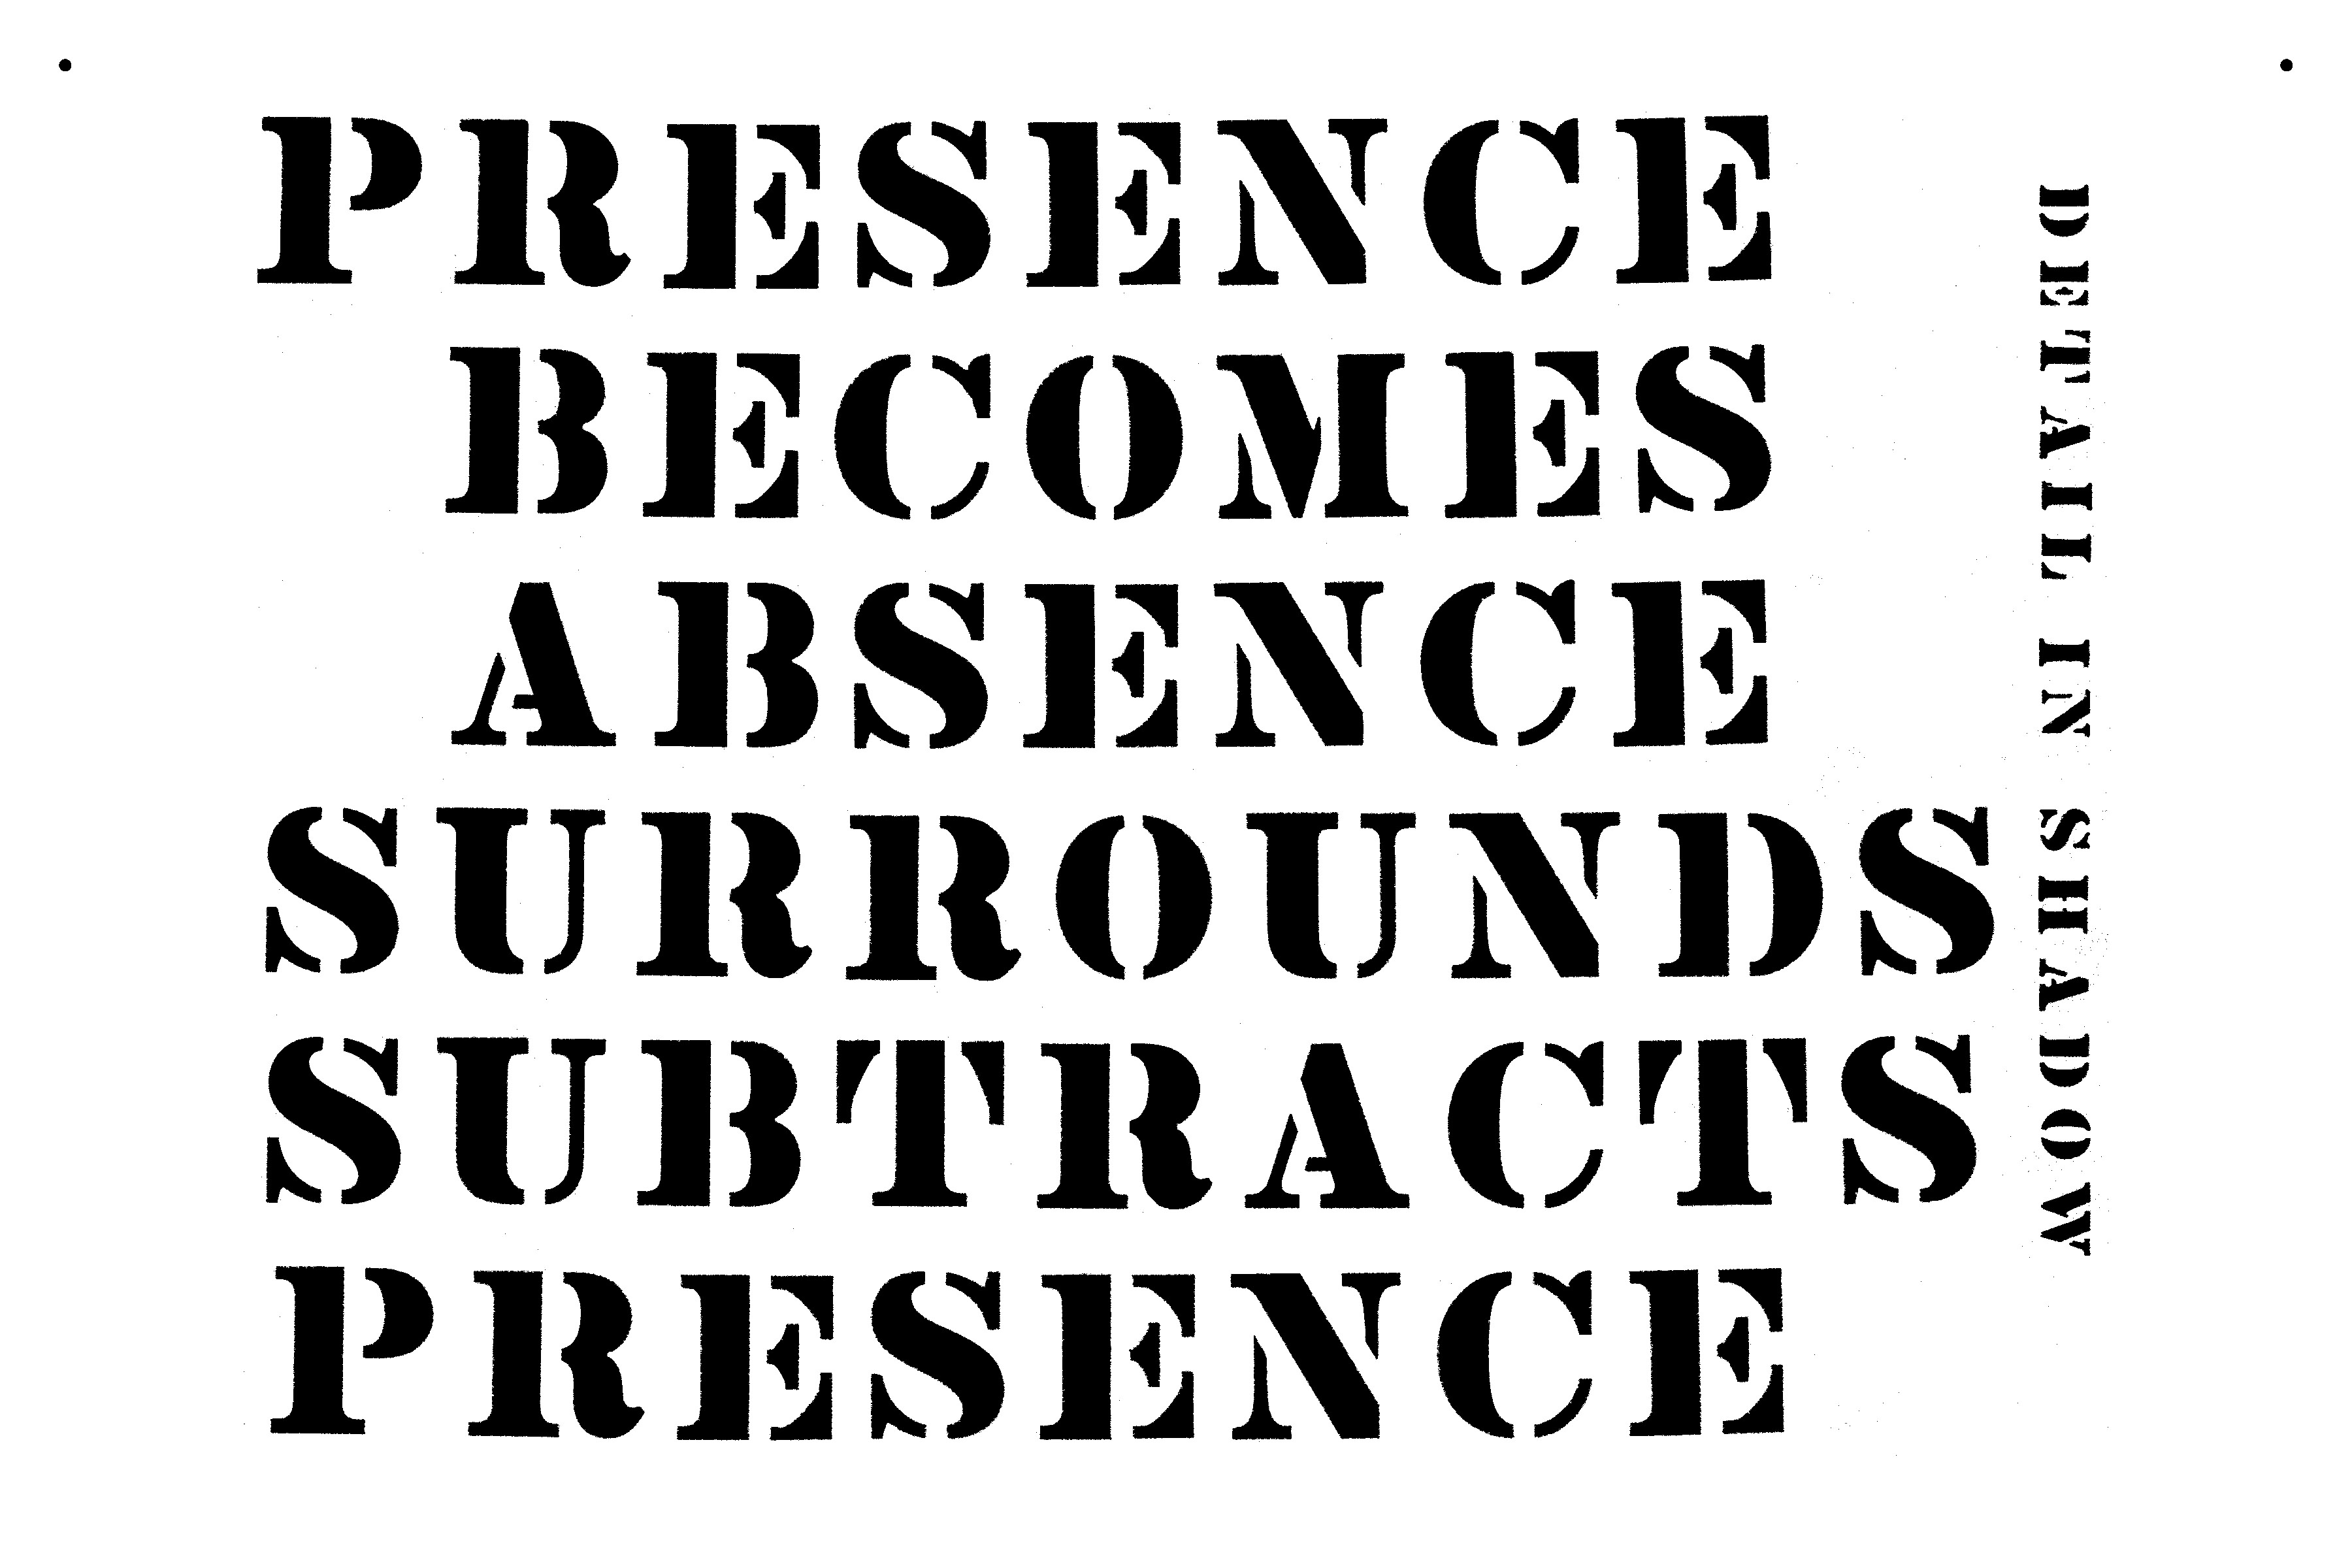 Presence Becomes Absence Surrounds Subtracts Presence